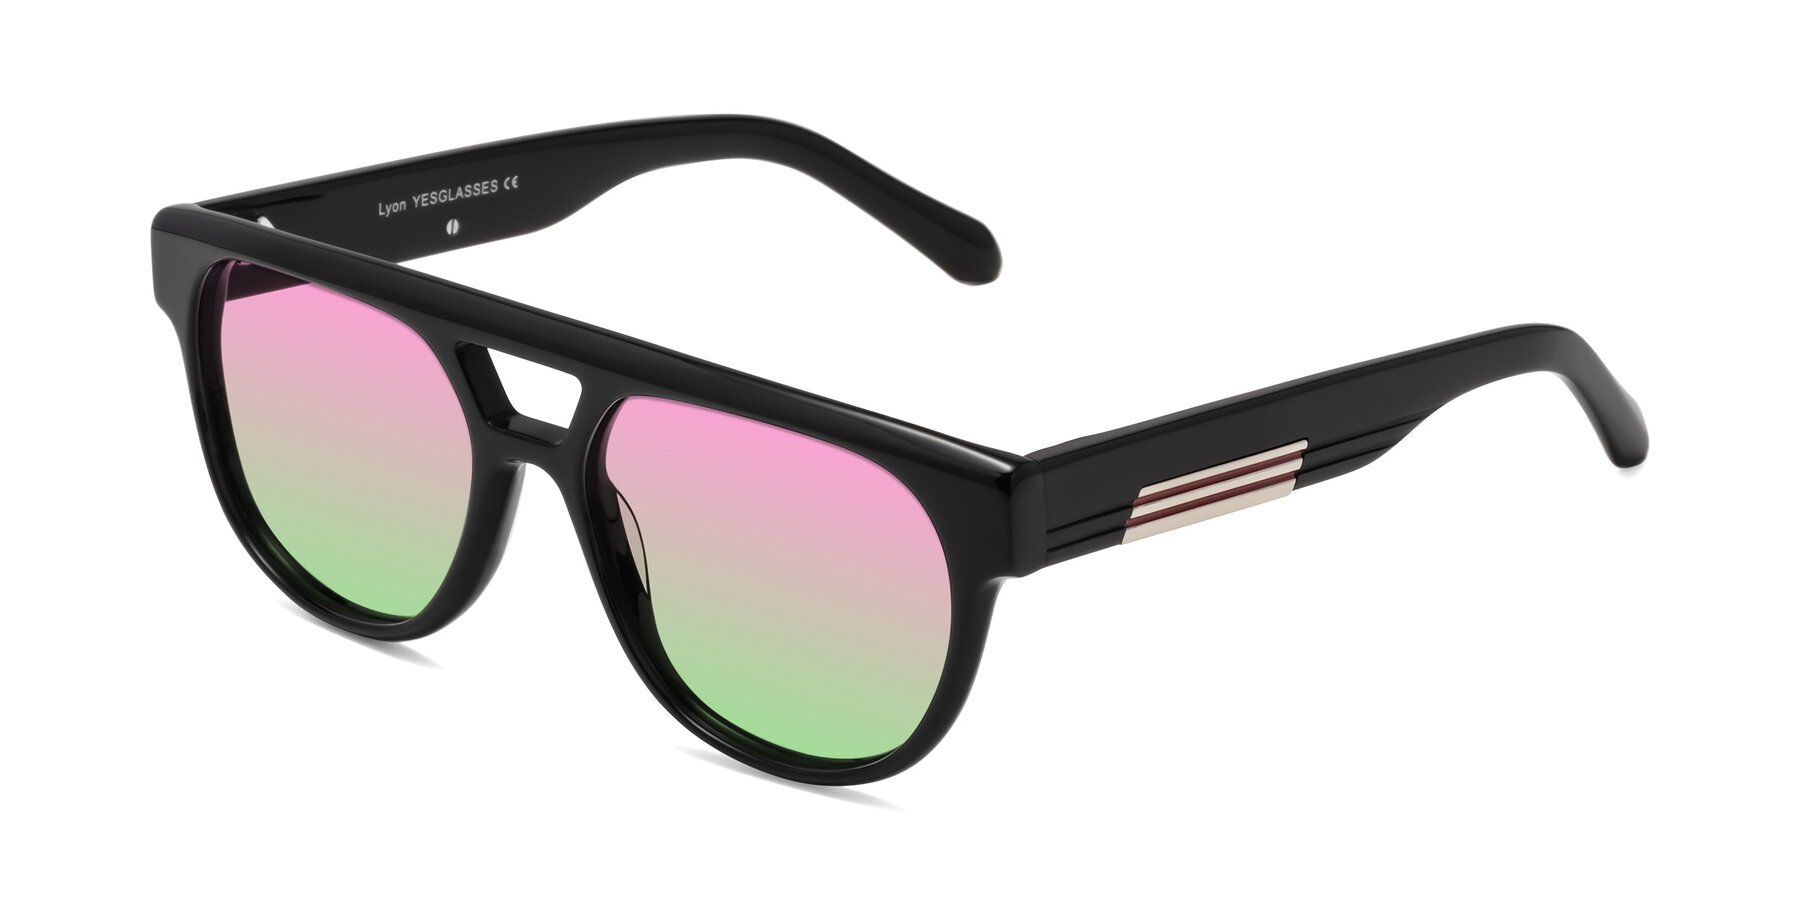 Angle of Lyon in Black with Pink / Green Gradient Lenses